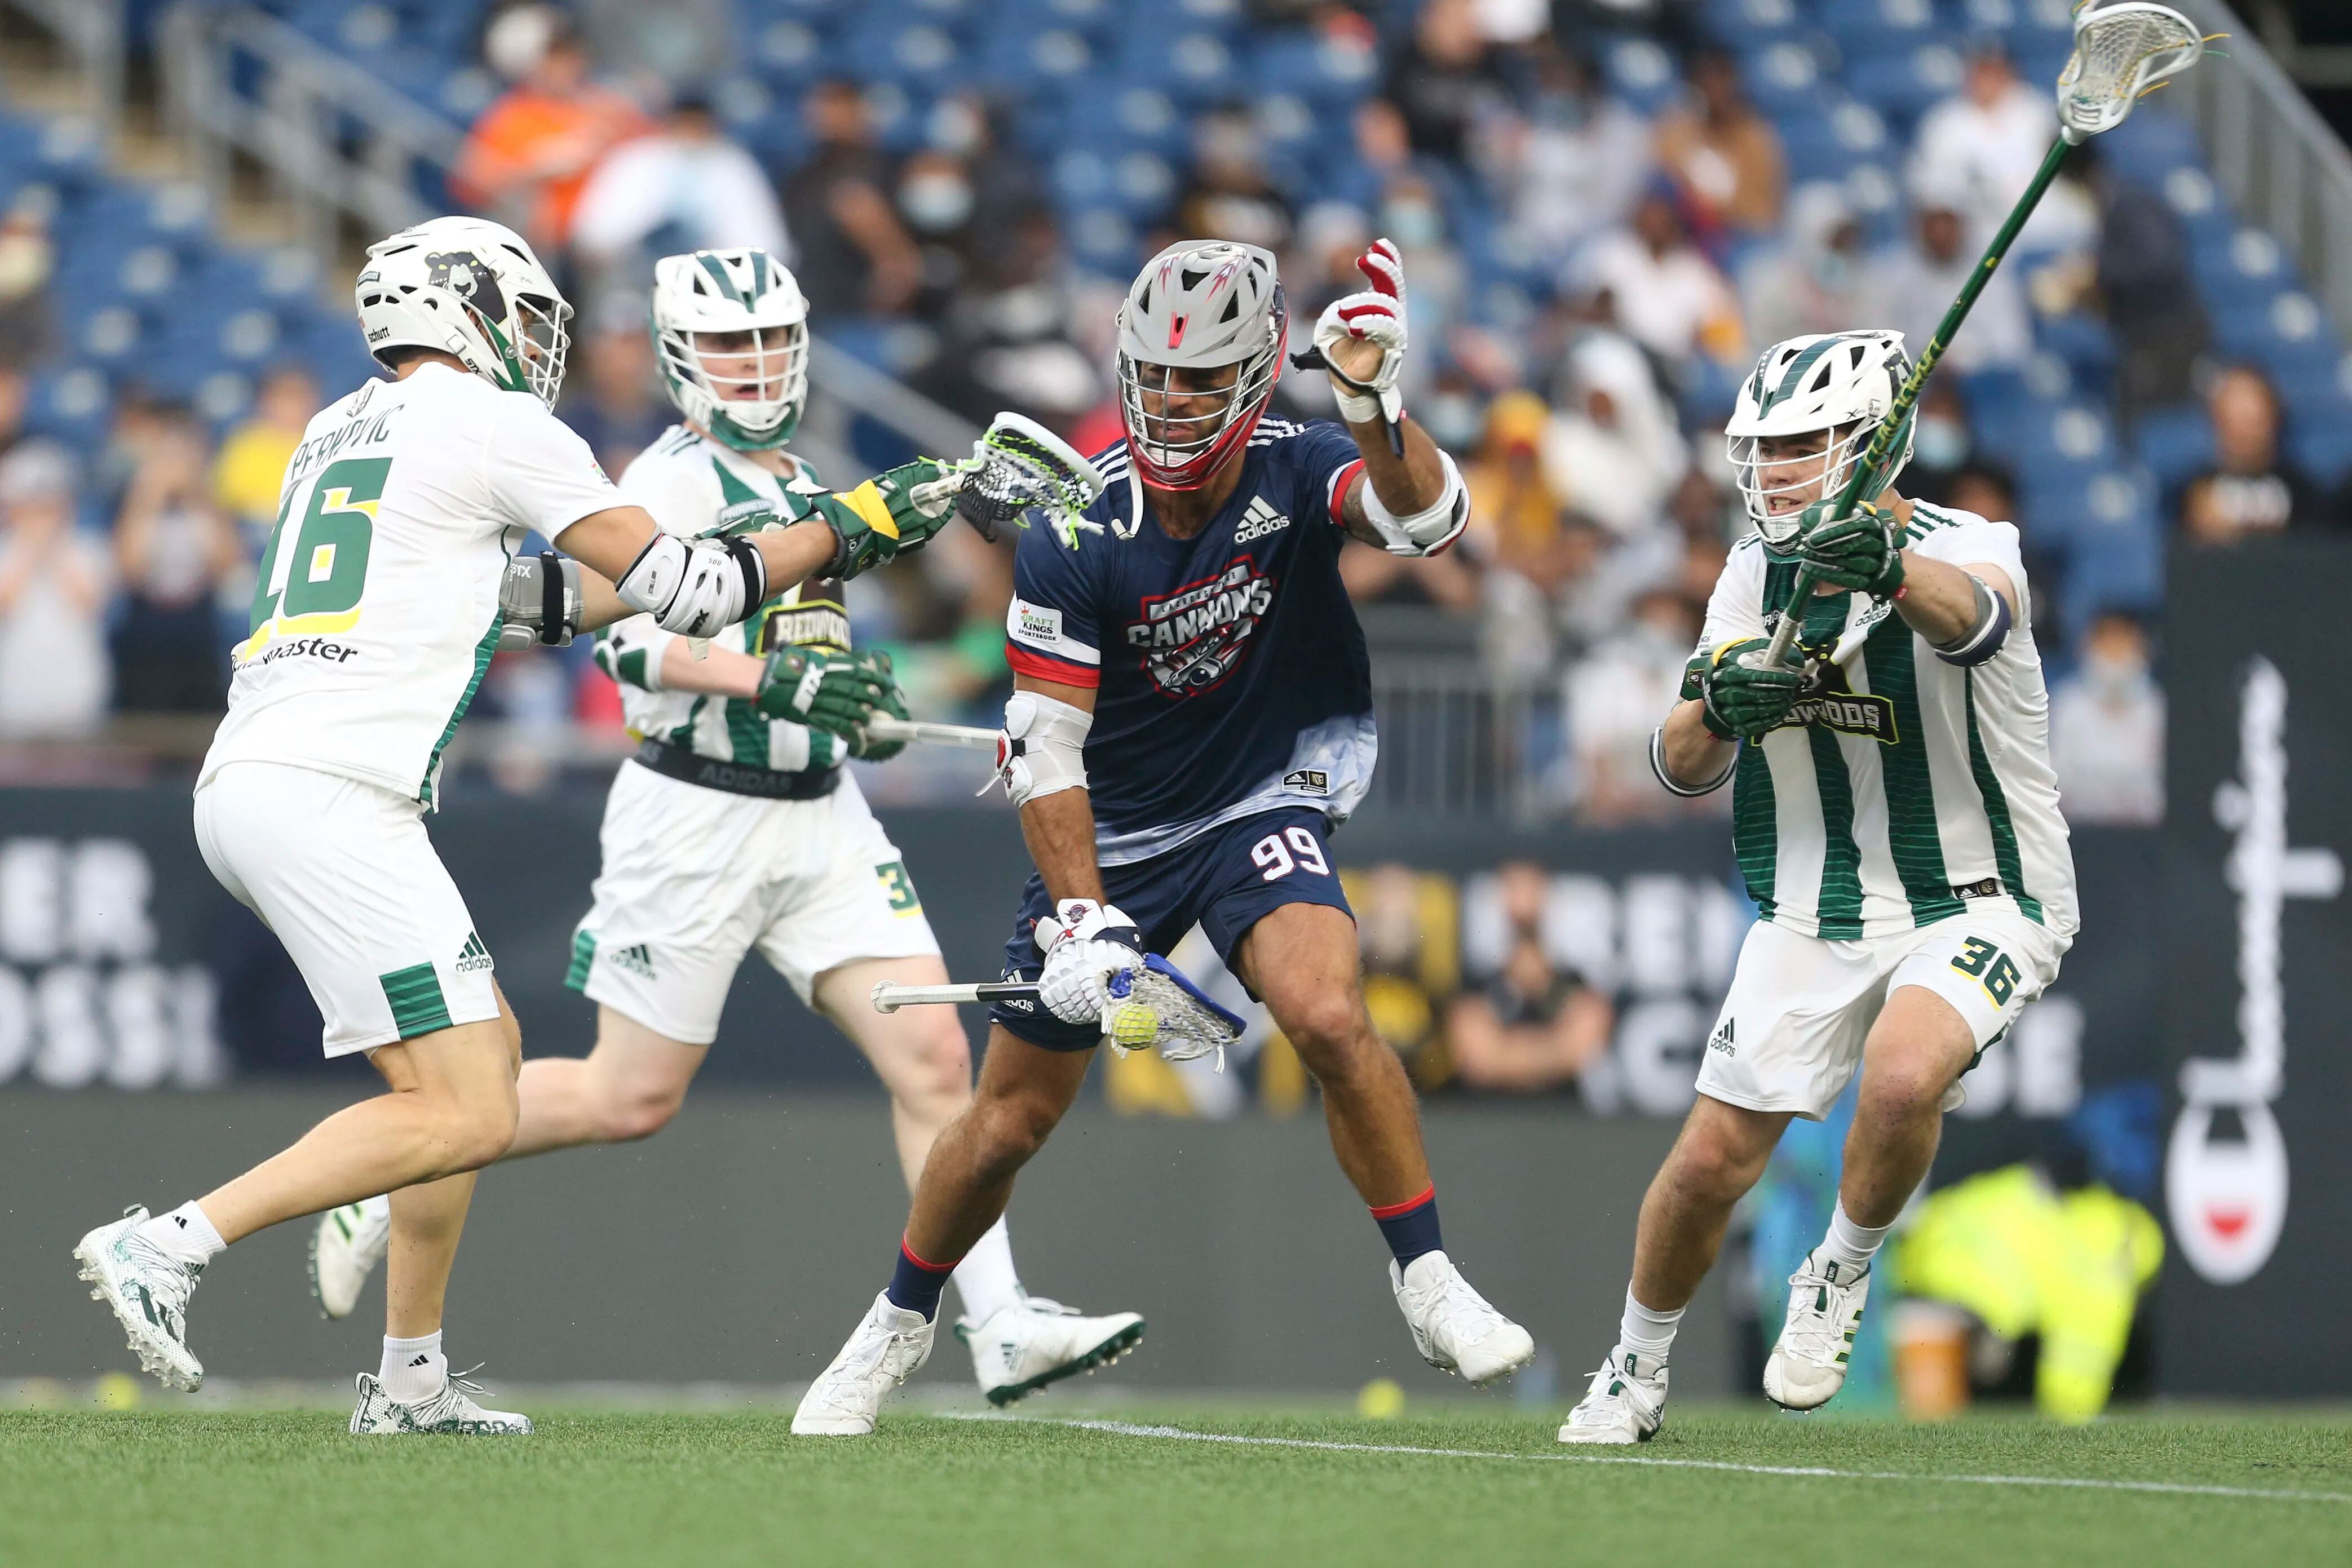 Premier Lacrosse League championship teams face-off for second time in  Philly: 'We're thrilled to be back